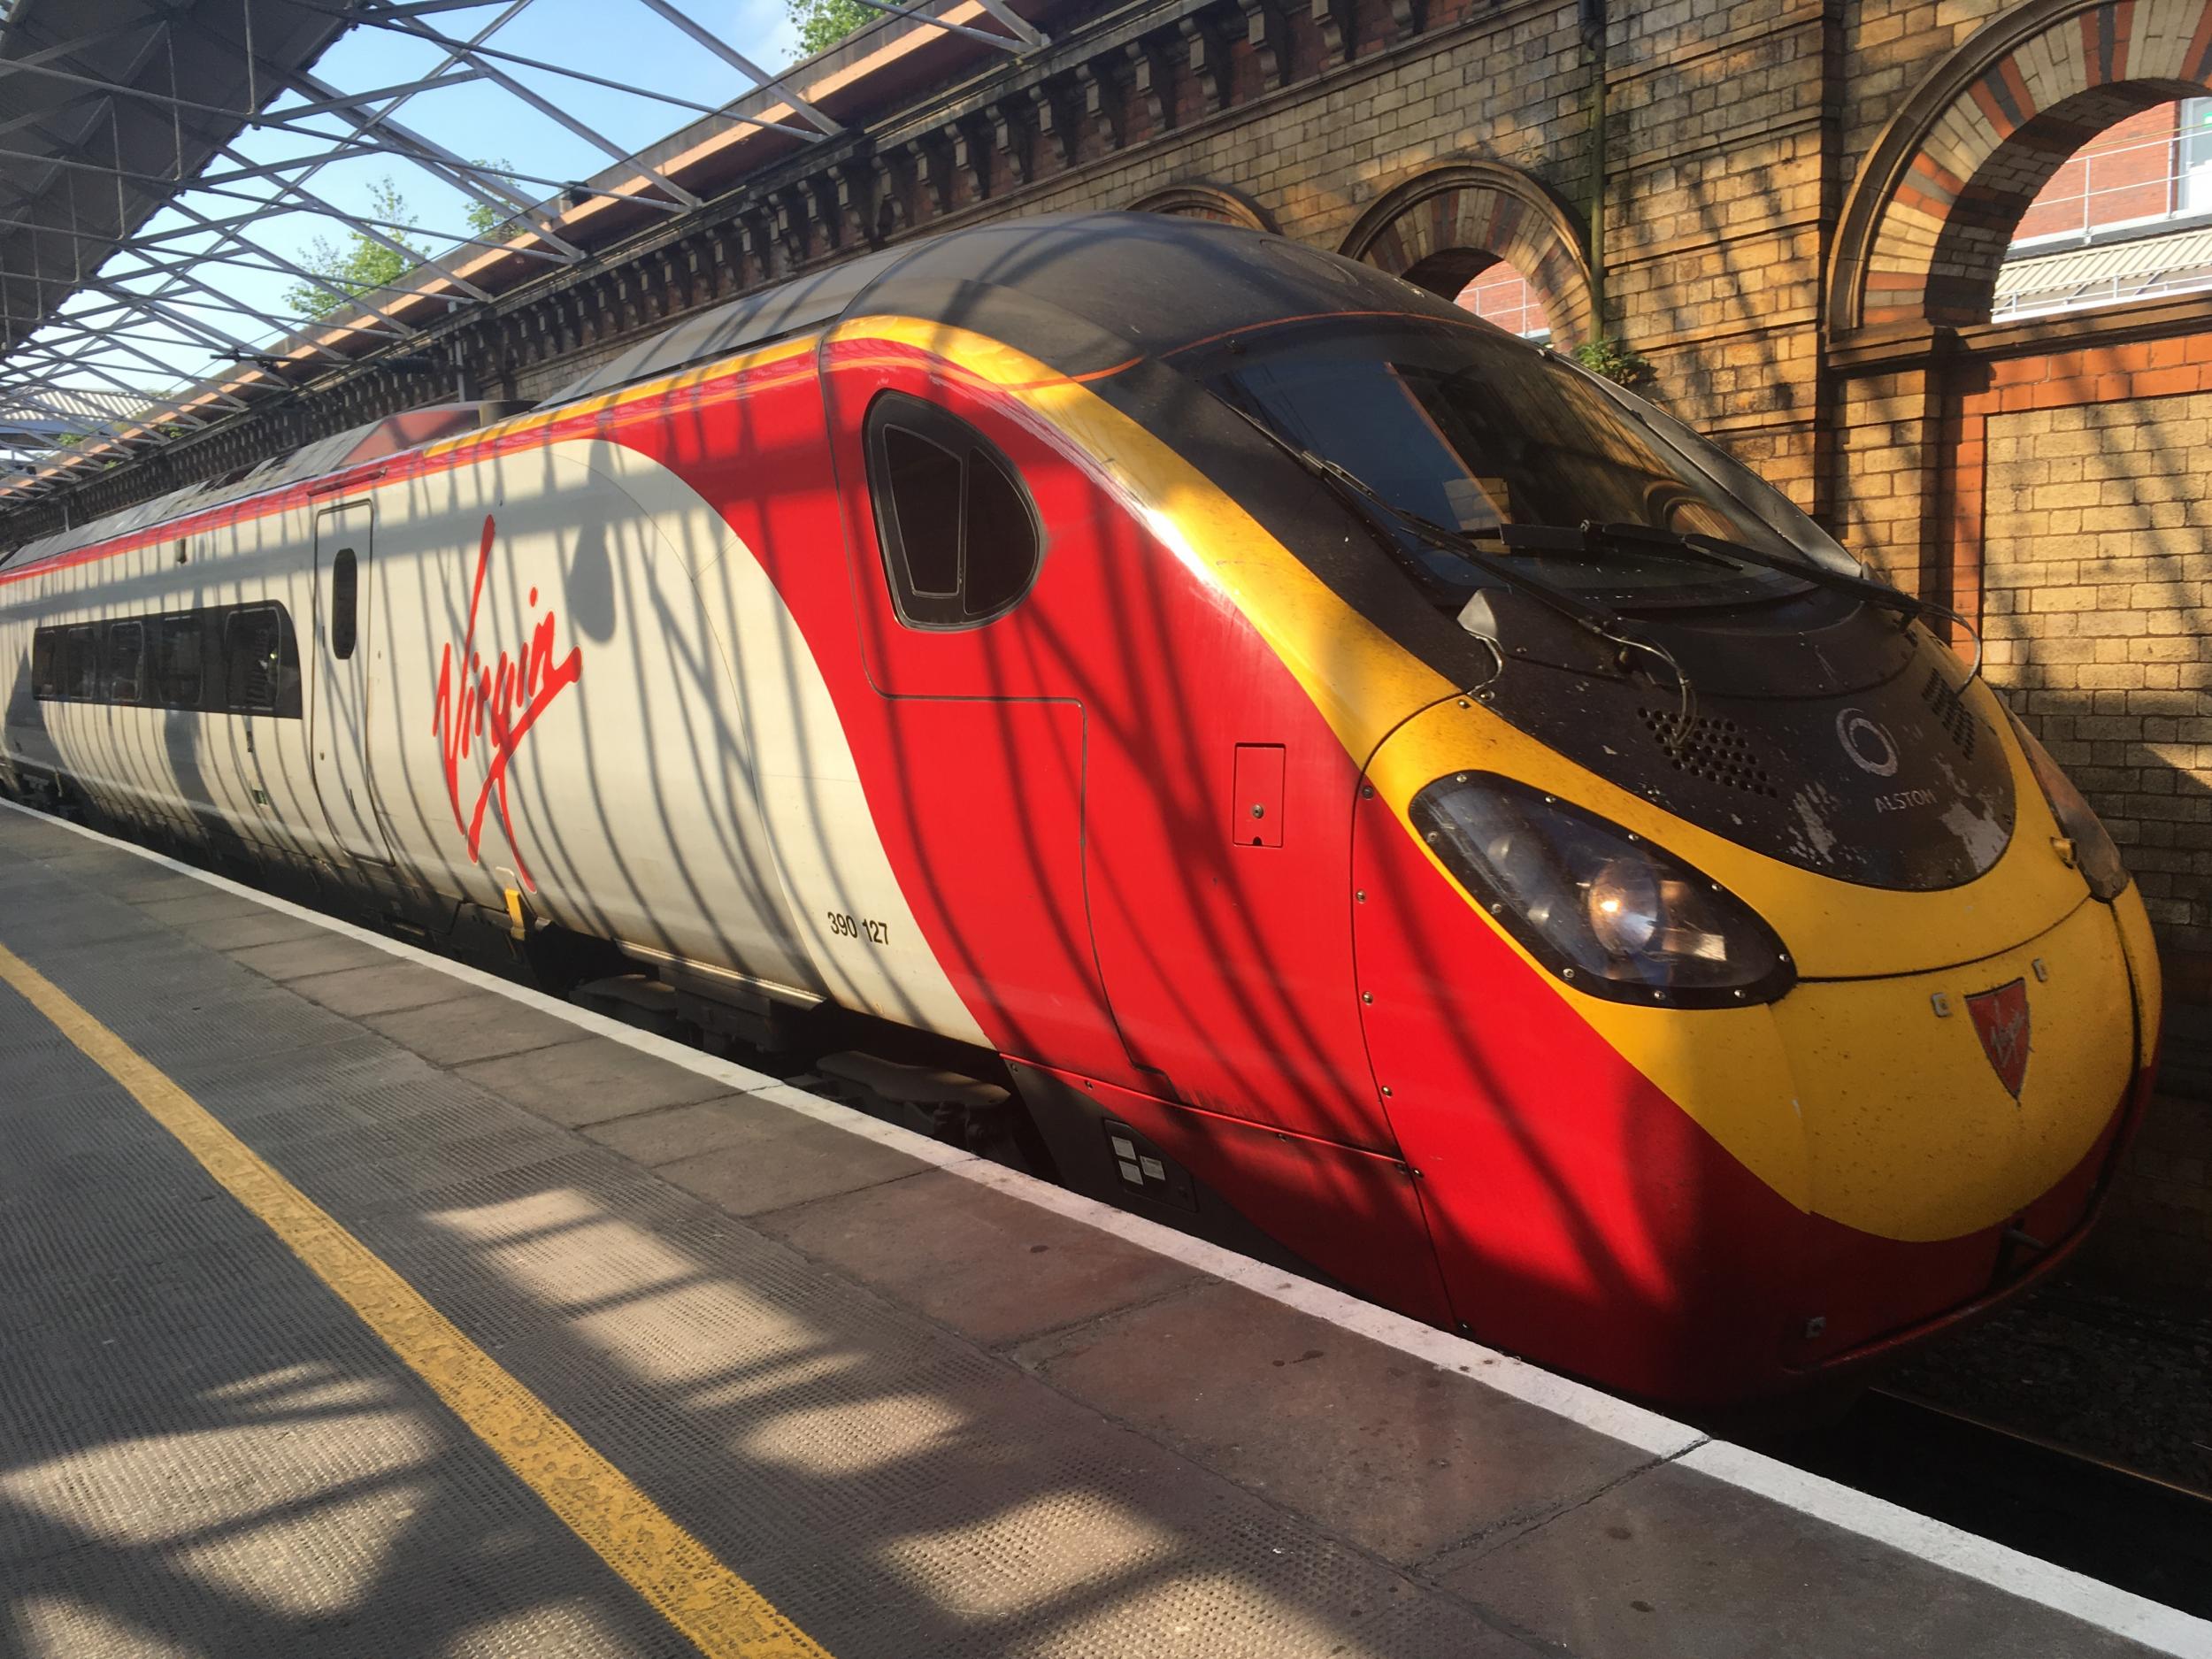 Departing soon: Virgin Trains will not be running on the West Coast Main Line from March 2020 onwards